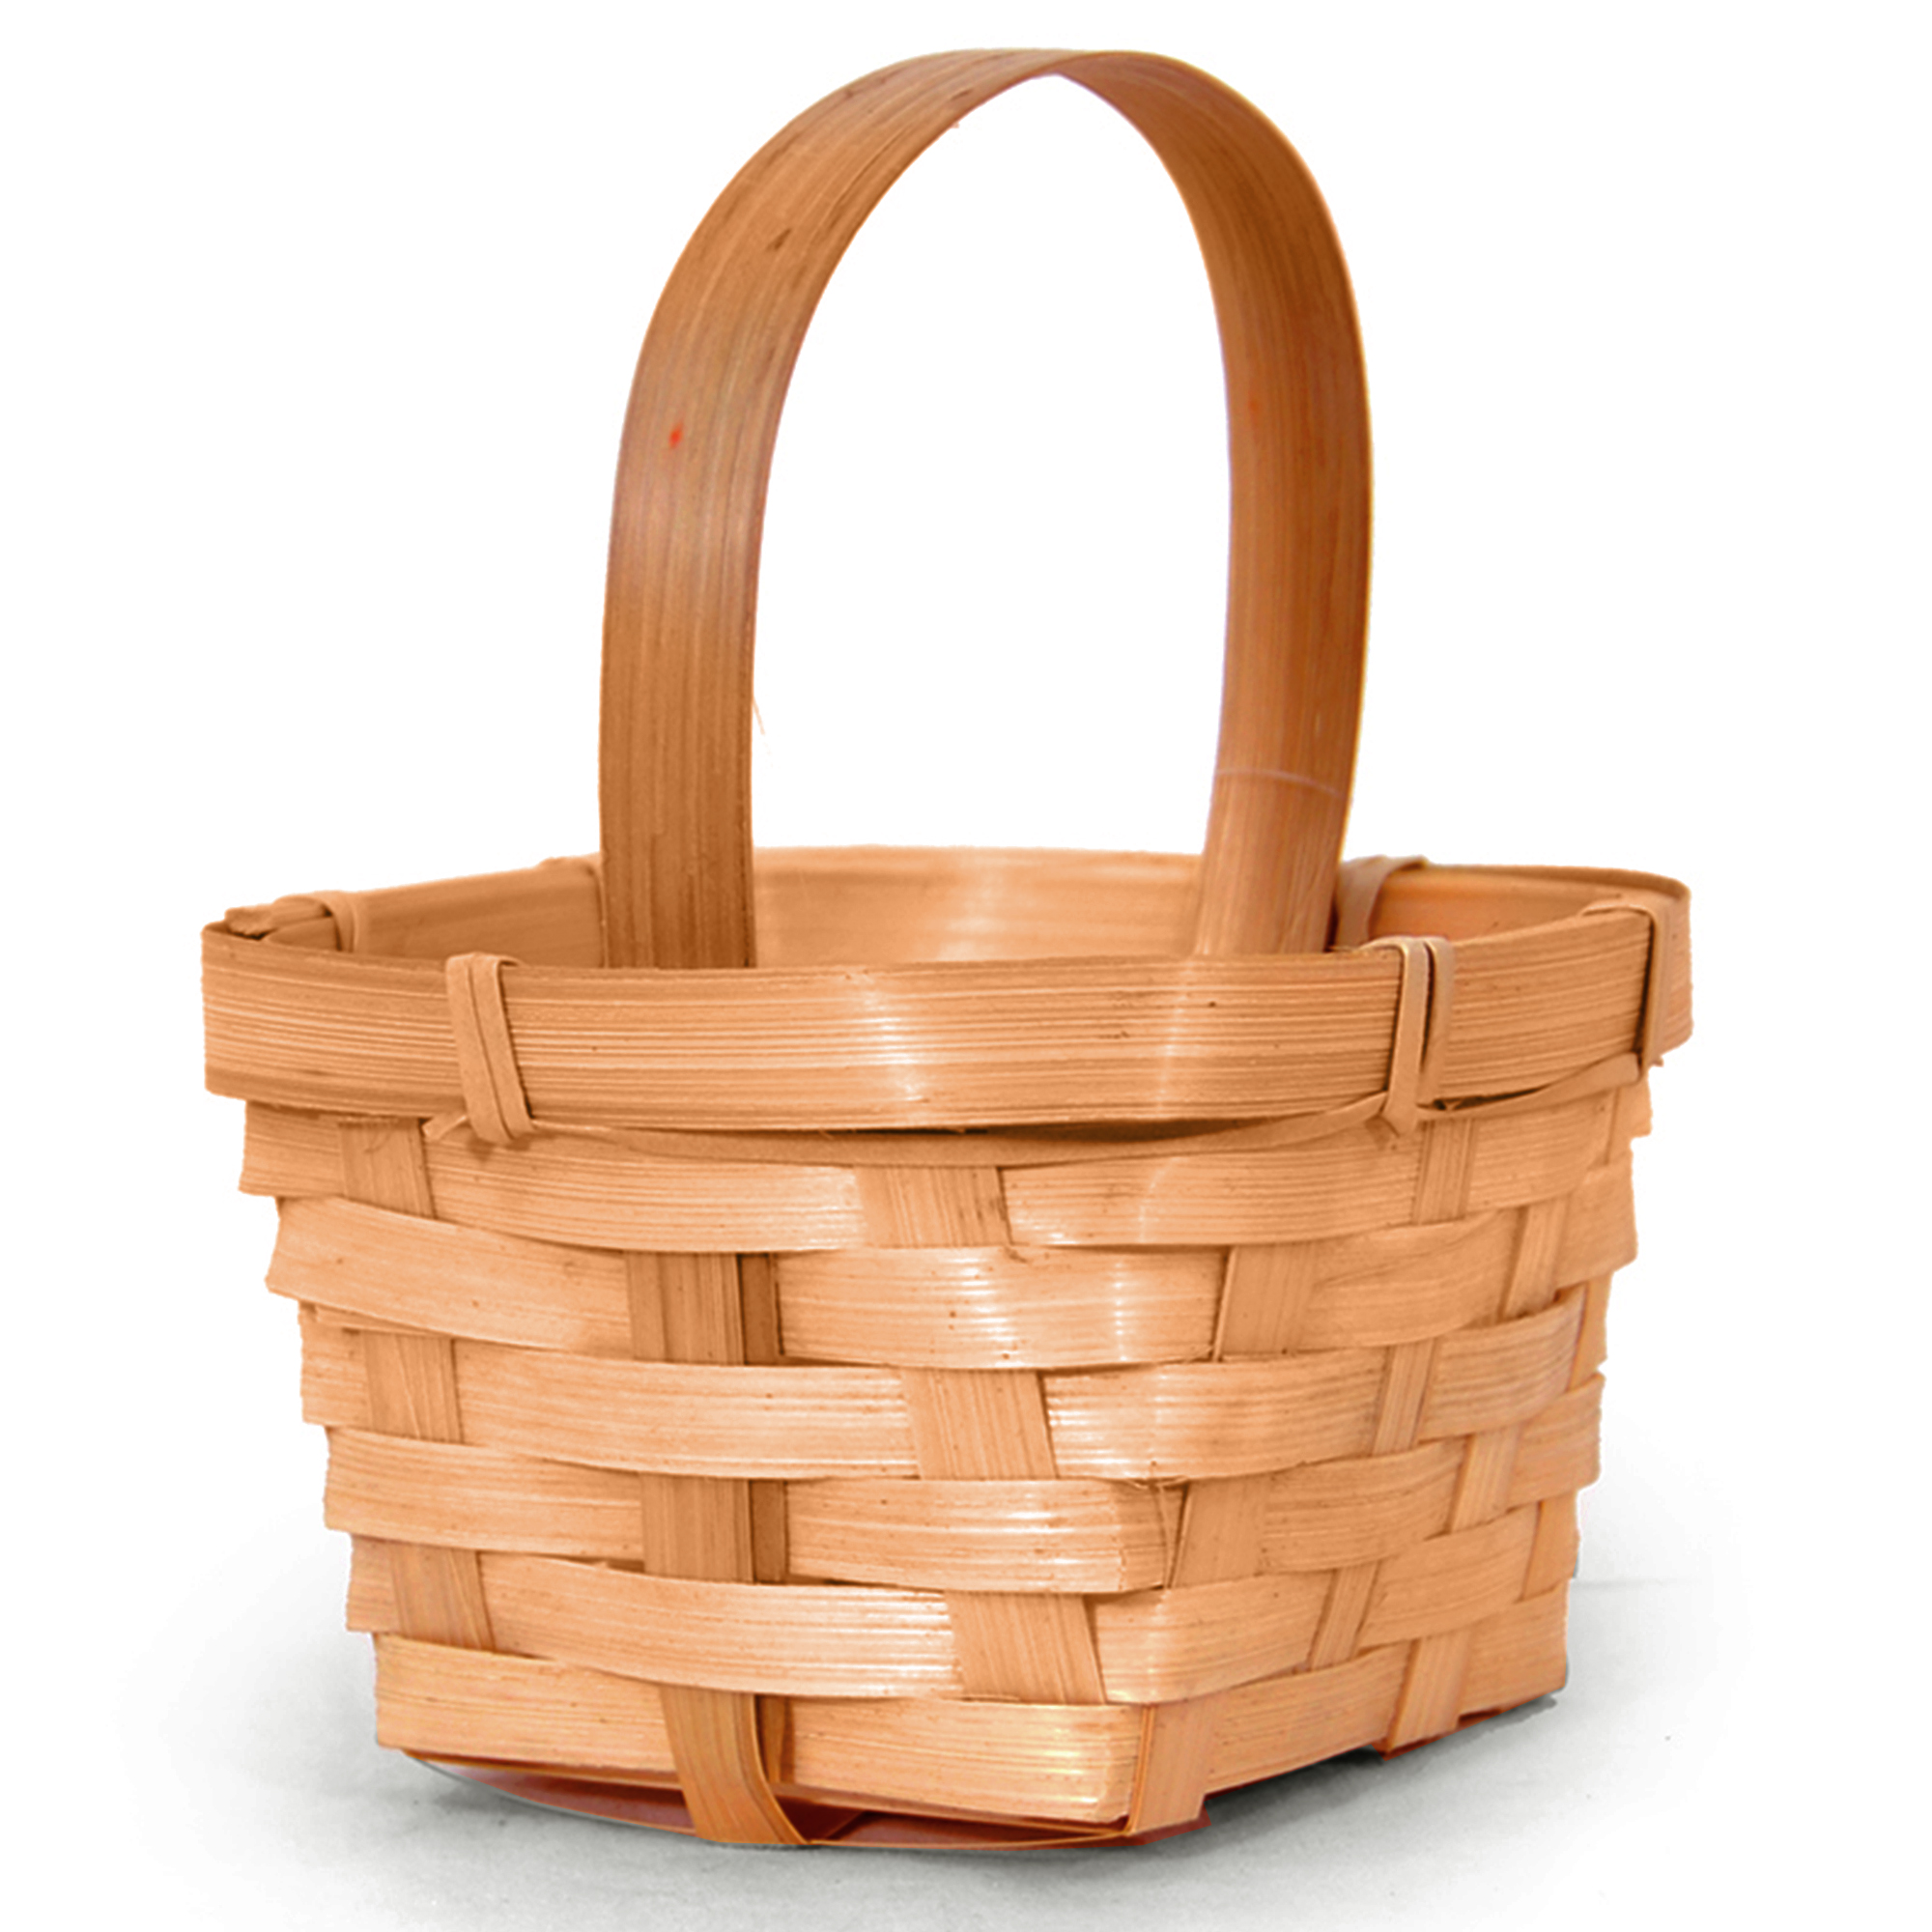 Miniature Bamboo Handle Basket - Square Round Edges 5in